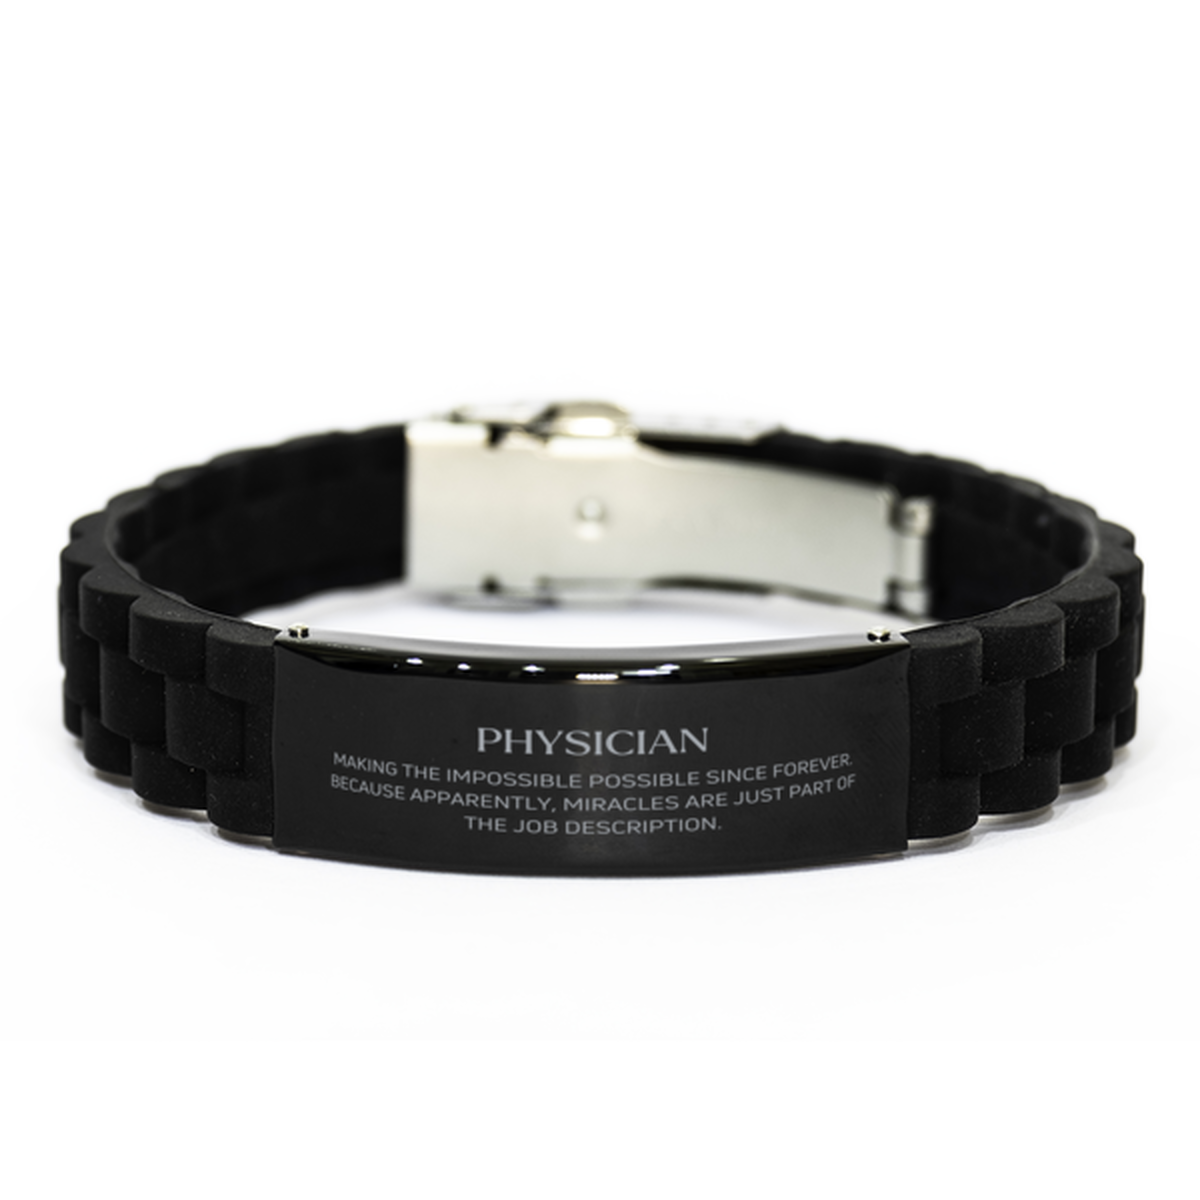 Funny Physician Gifts, Miracles are just part of the job description, Inspirational Birthday Black Glidelock Clasp Bracelet For Physician, Men, Women, Coworkers, Friends, Boss